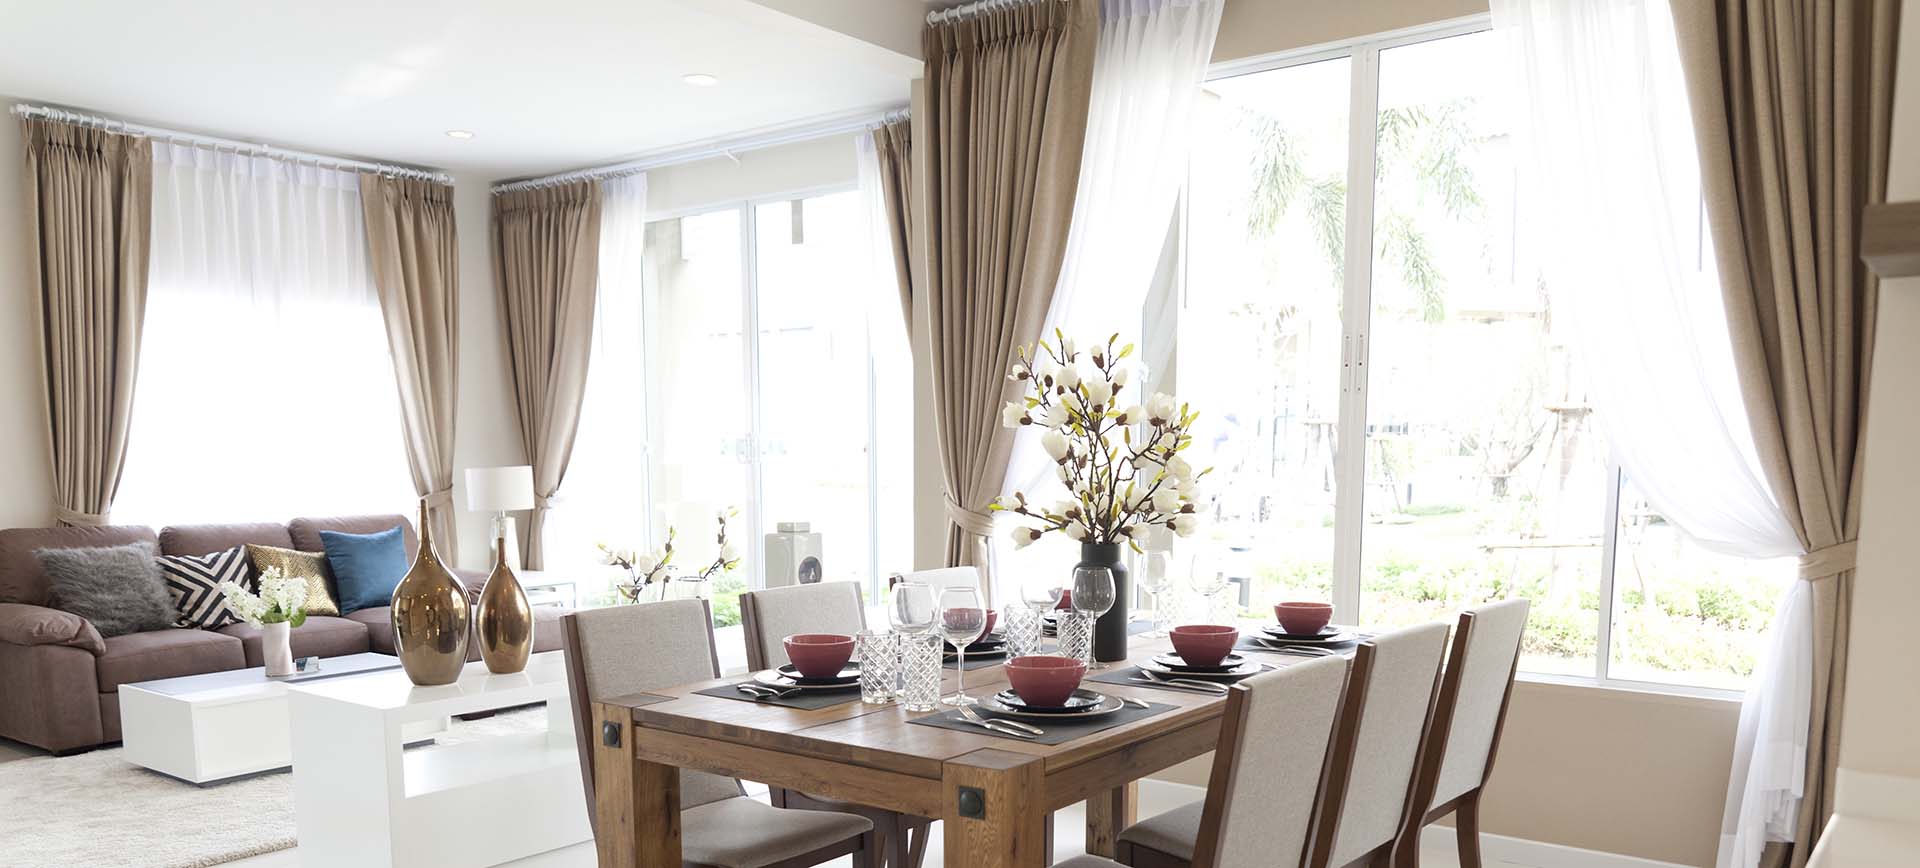 Custom Drapes from Window Treatments by Design